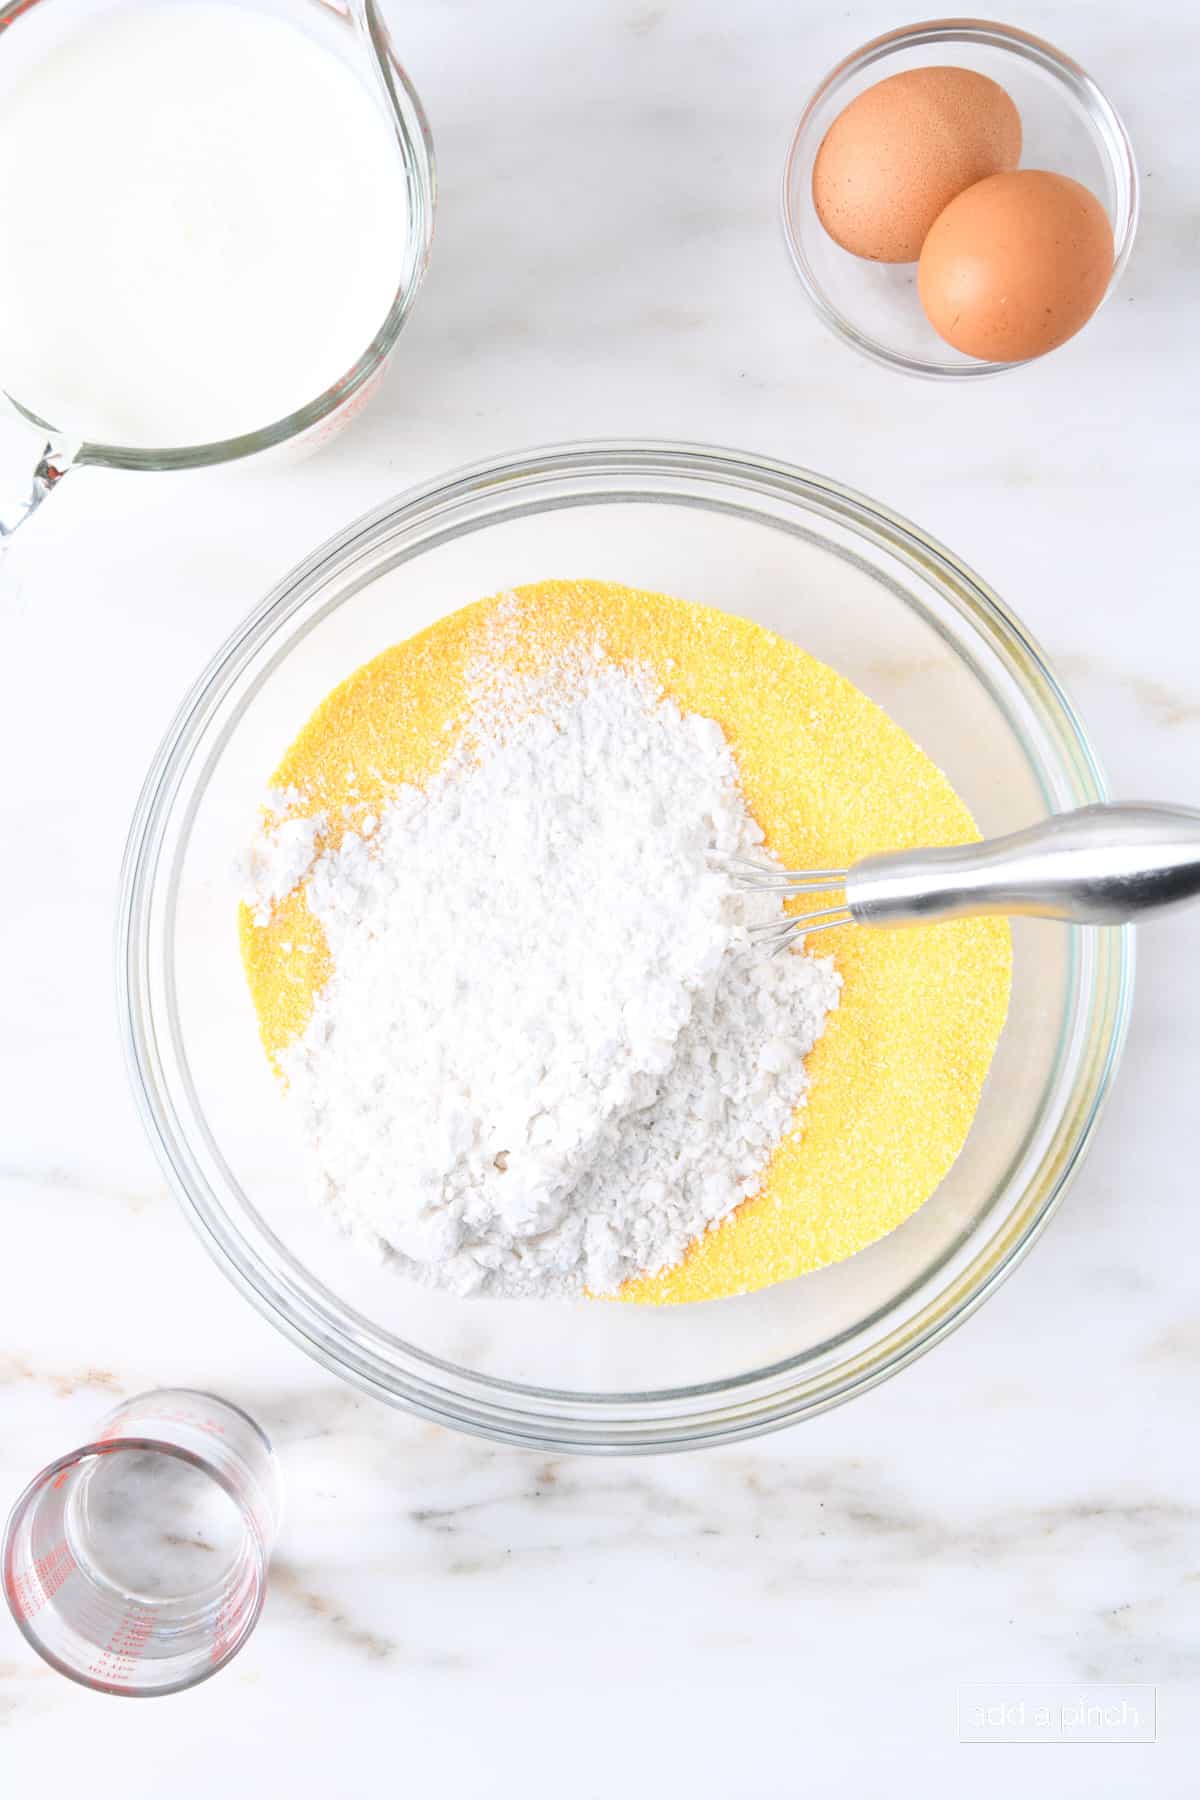 Flour added to cornmeal in a glass bowl.